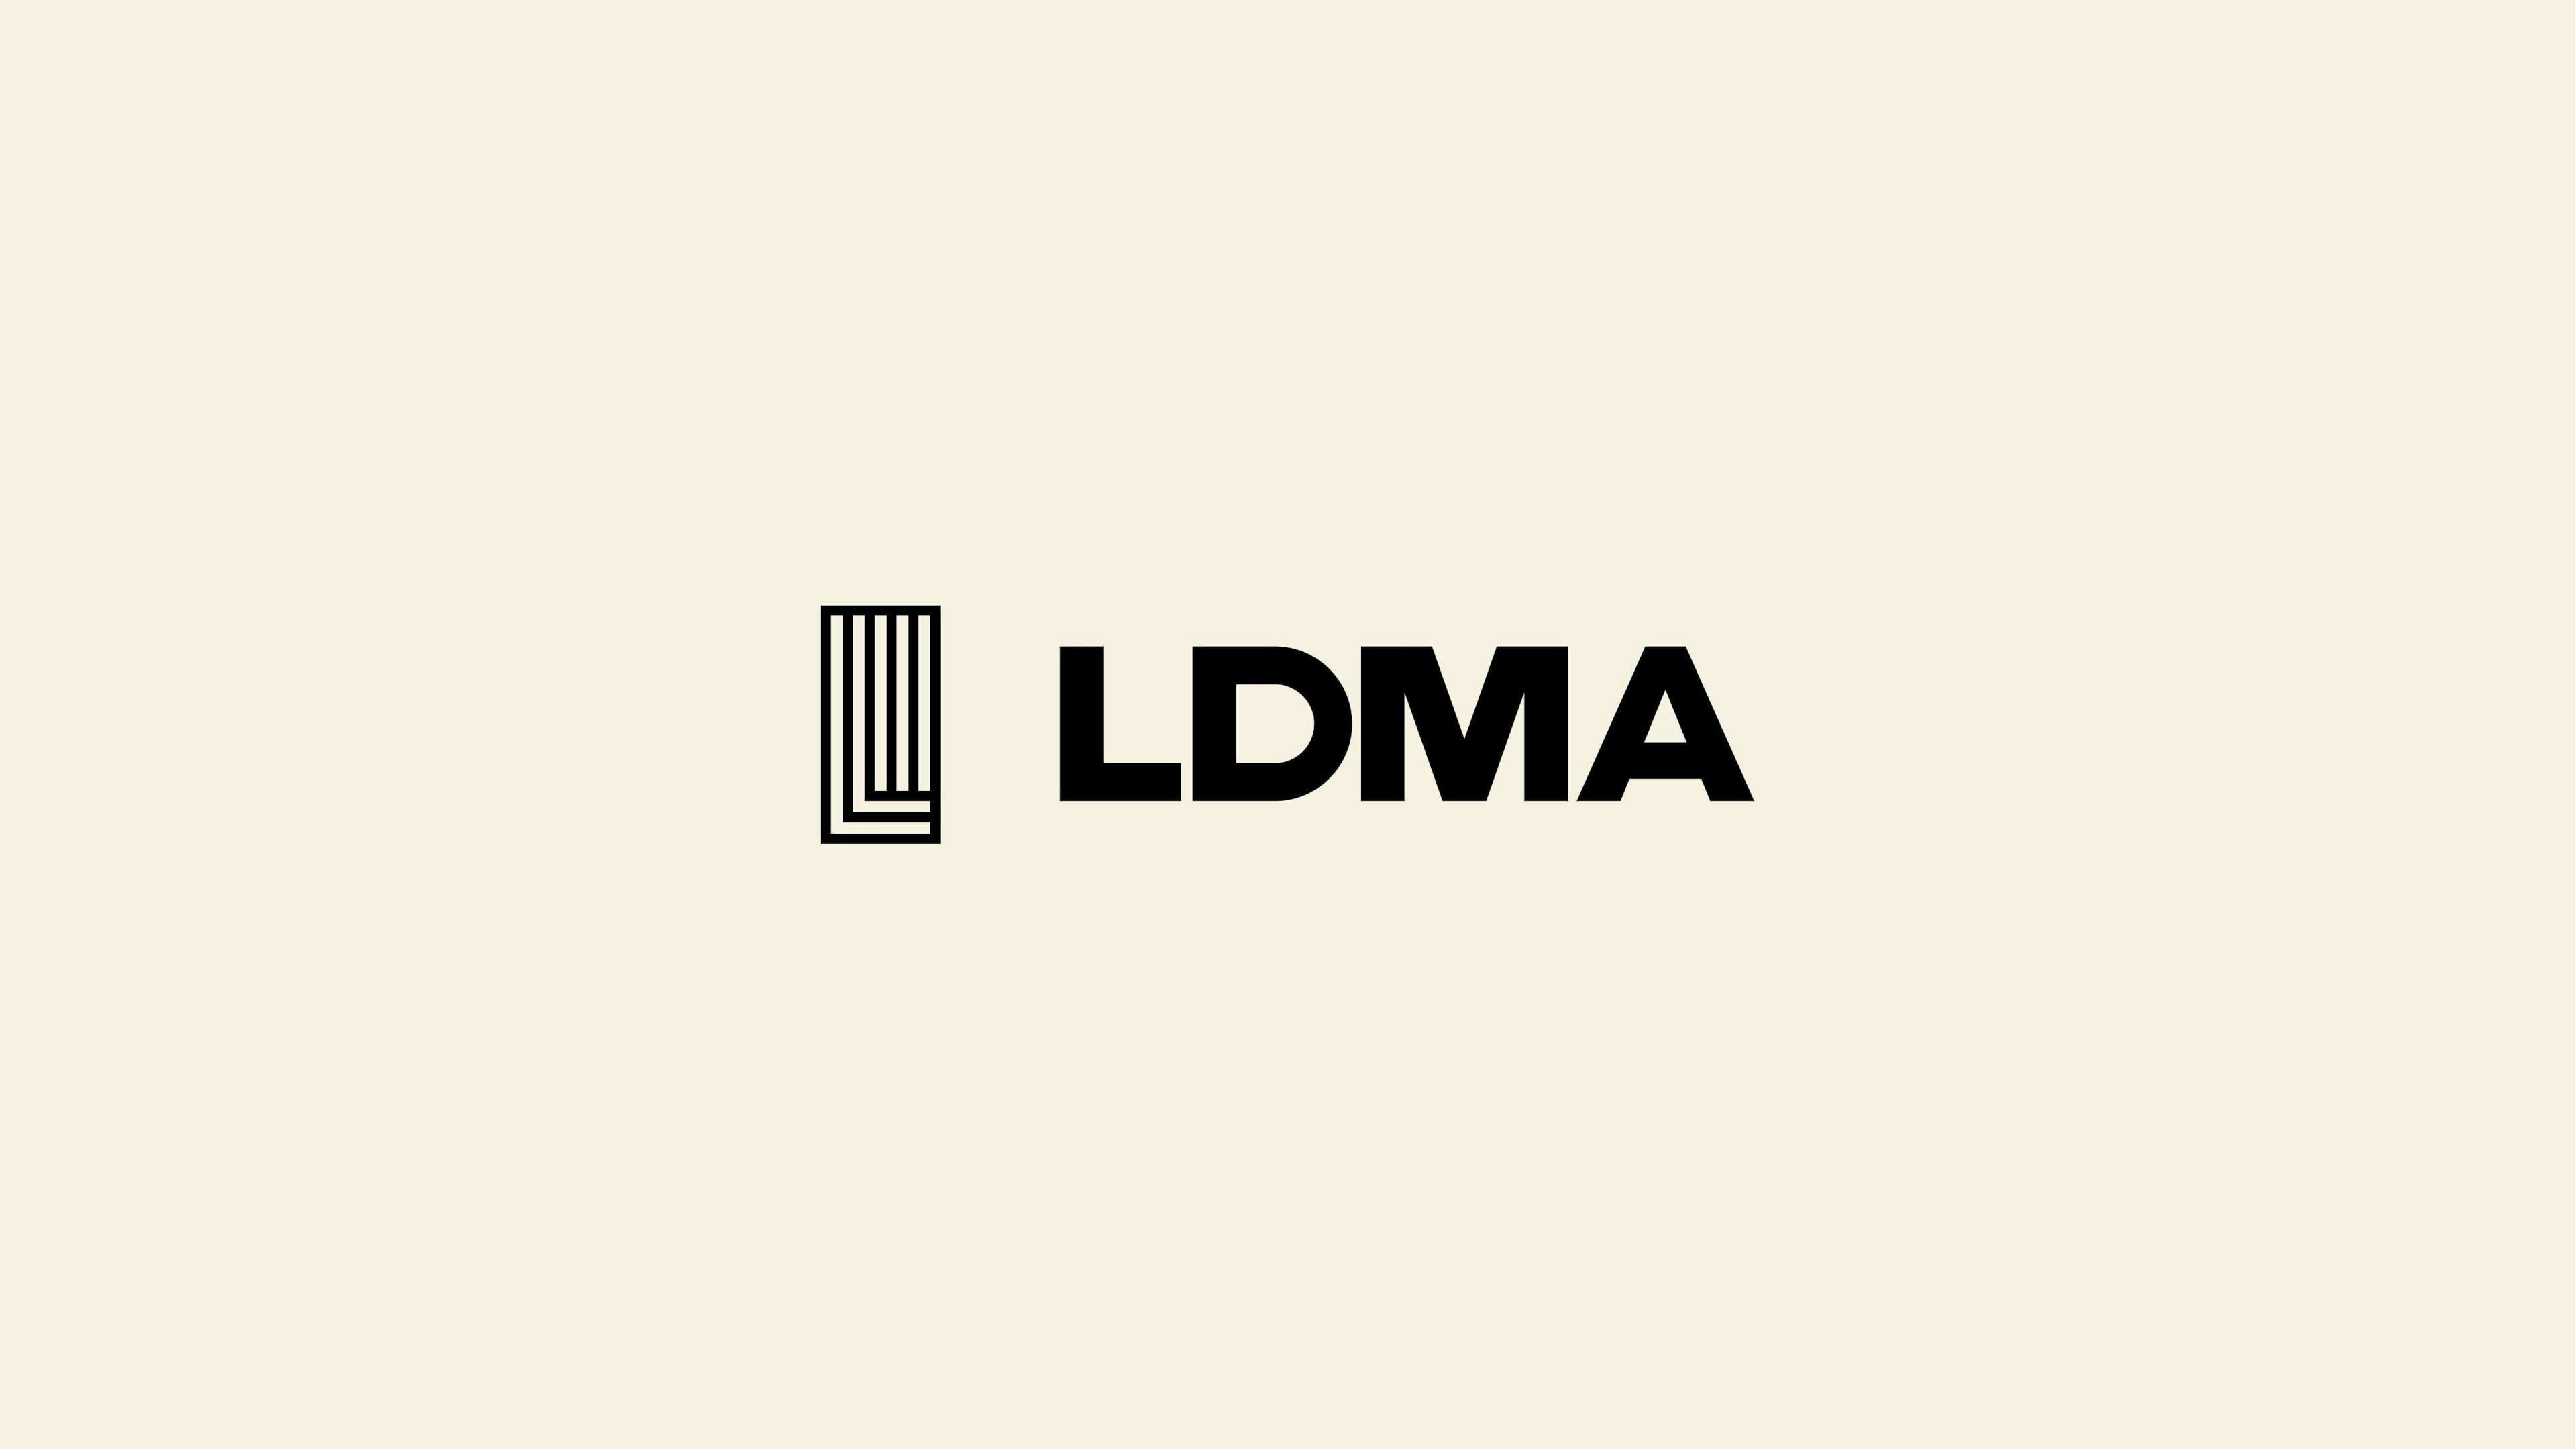 Brand identity, responsive design, and development for LDMA, an active intimates brand for women that move.